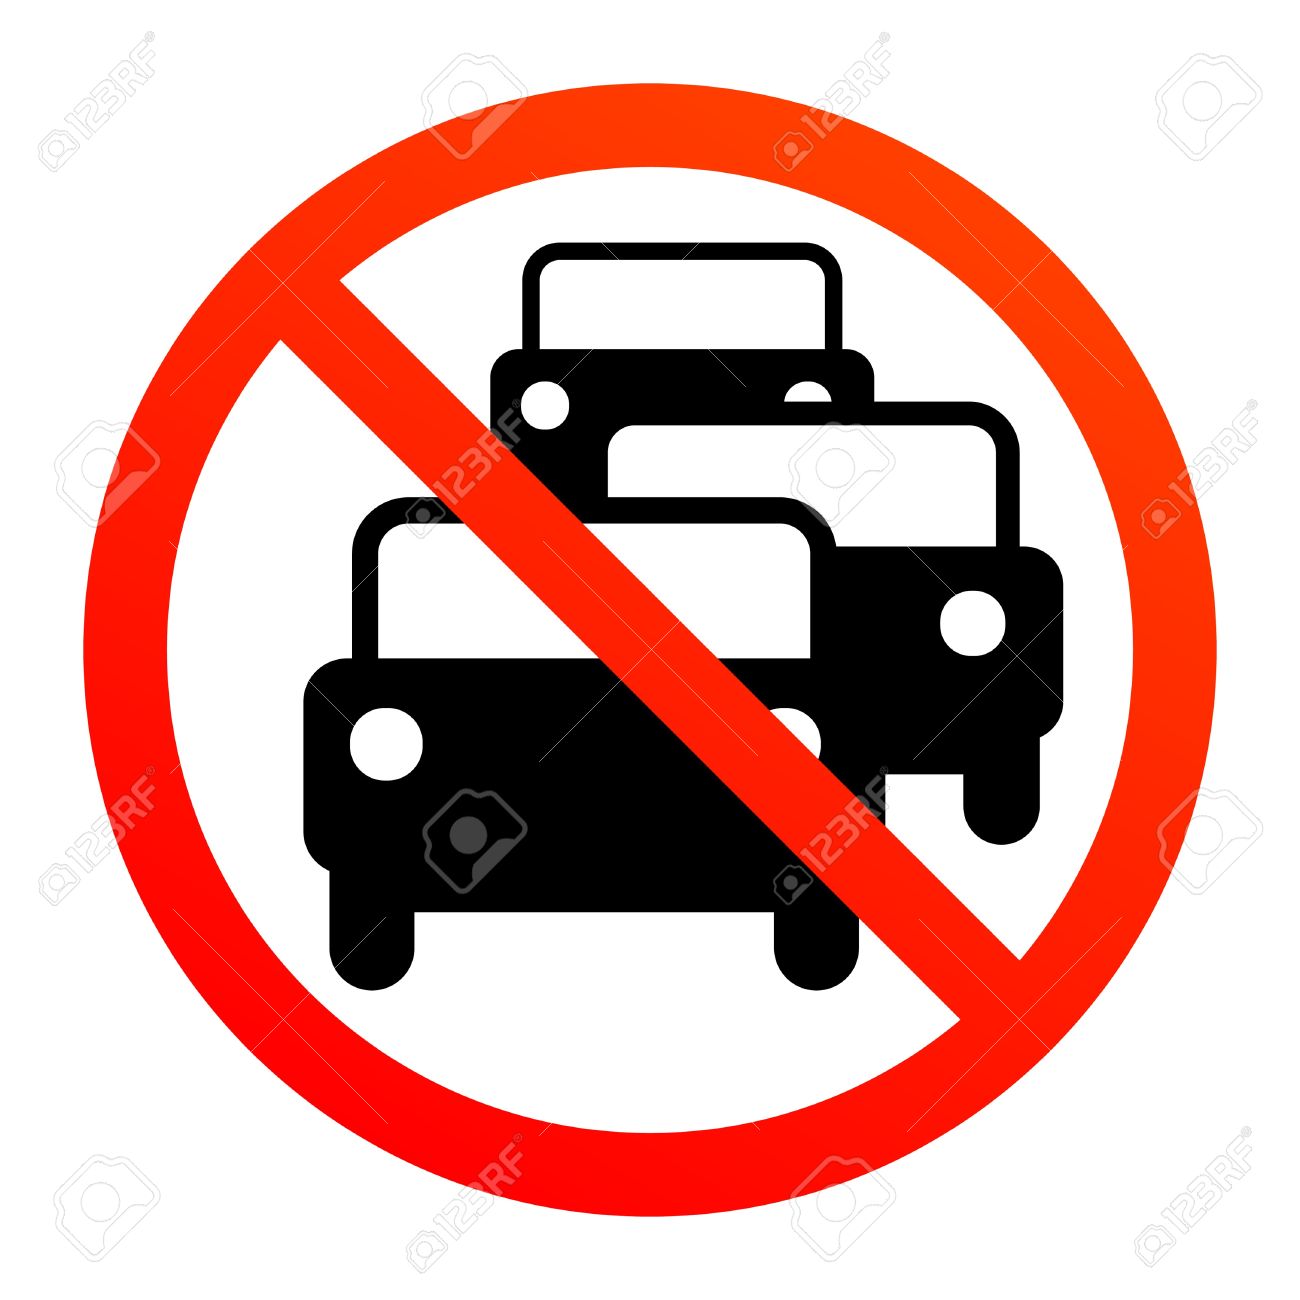 3,333 Traffic Is Prohibited Stock Vector Illustration And Royalty.